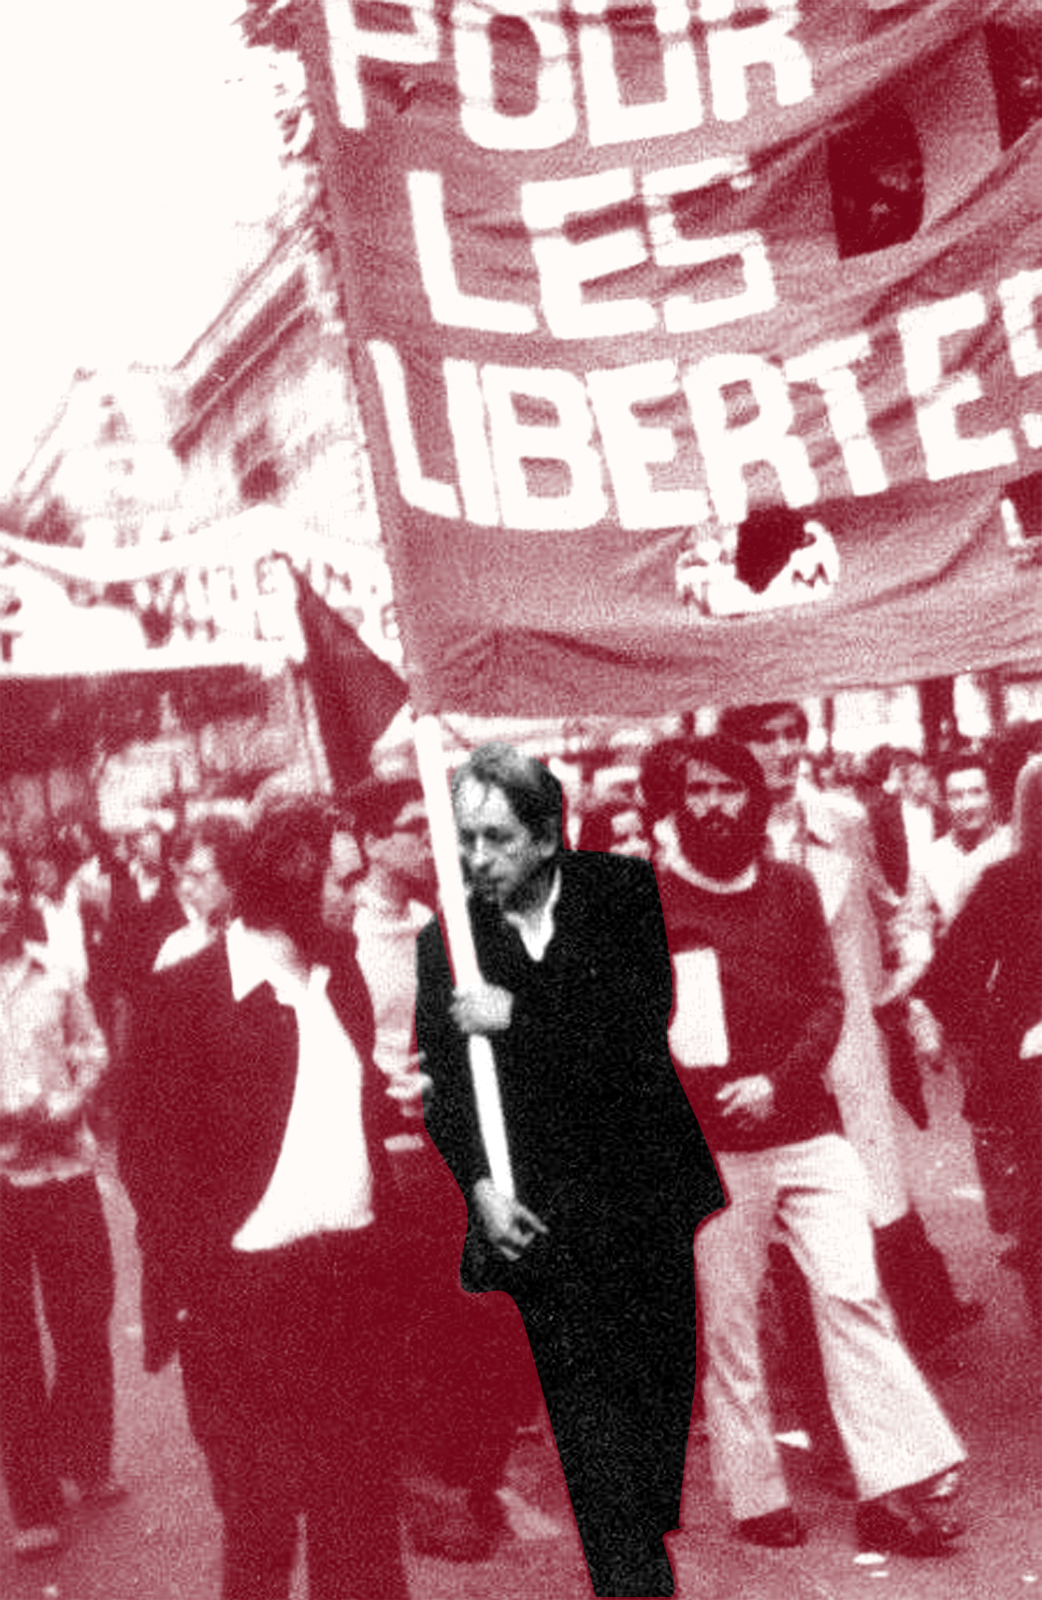 How Free Are We? Louis Althusser on Ideology & Subjectivity